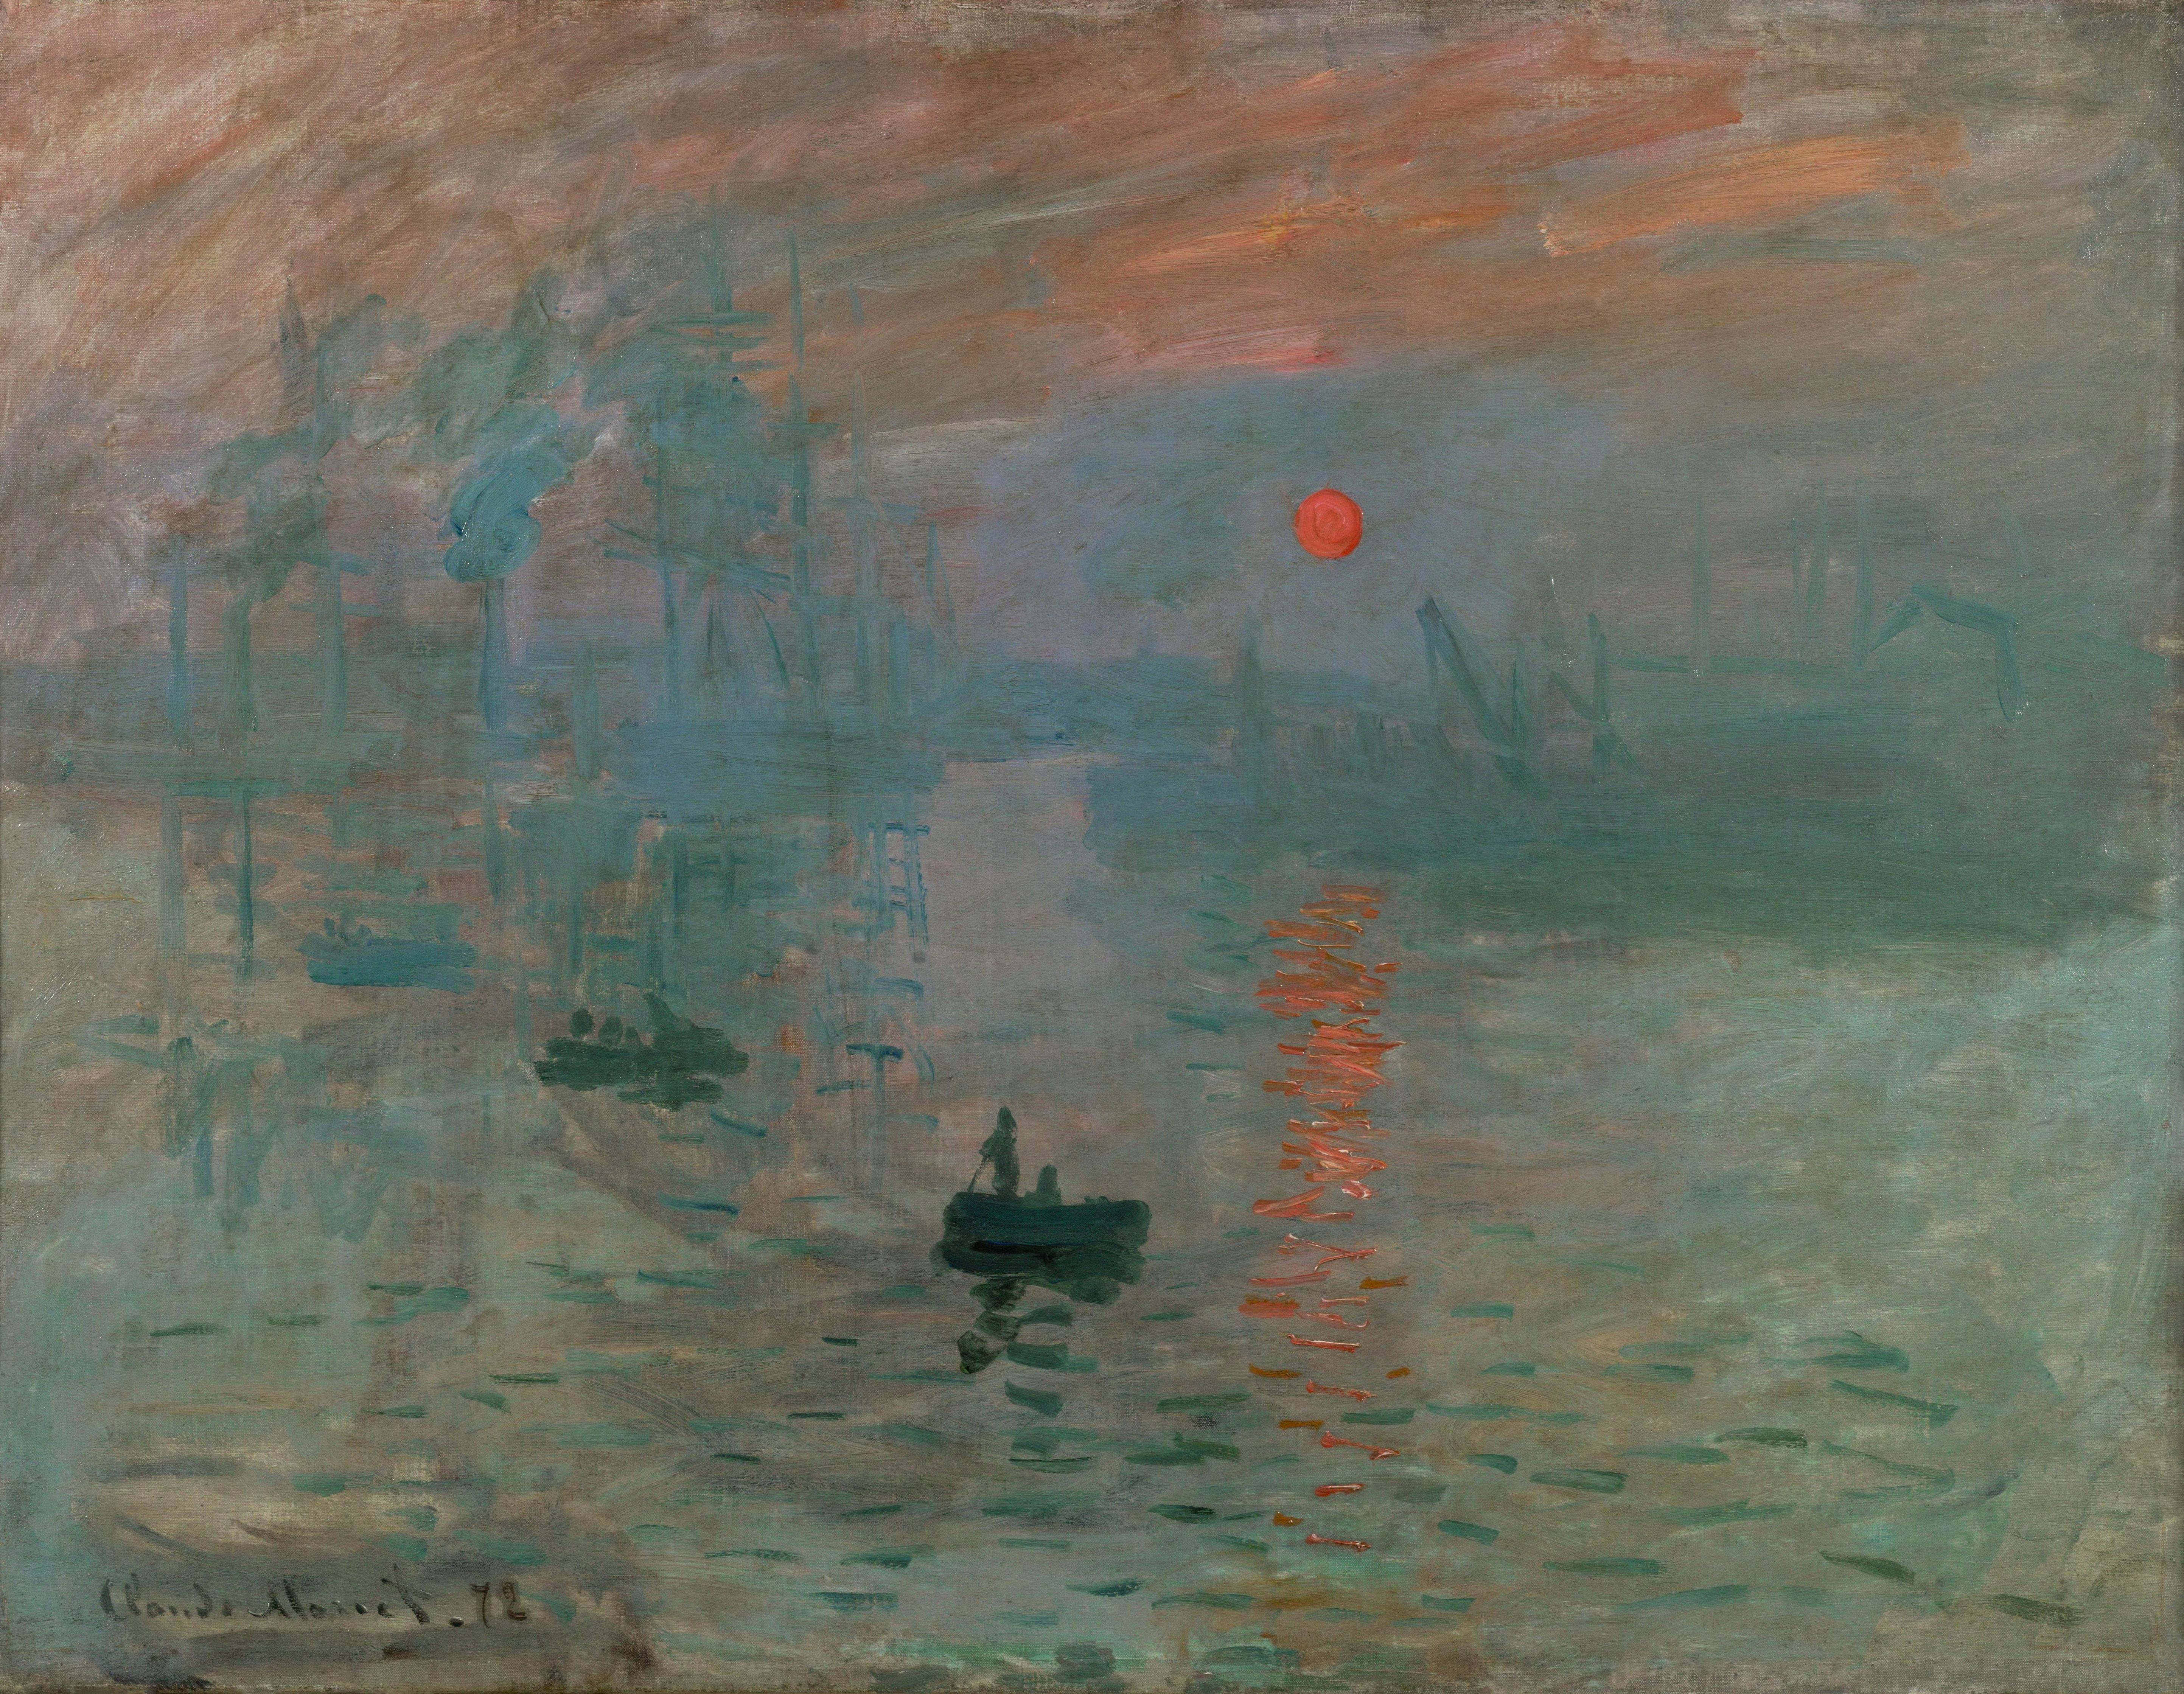 A single small boat is on the water, while a red sun rises and casts a long reflection.